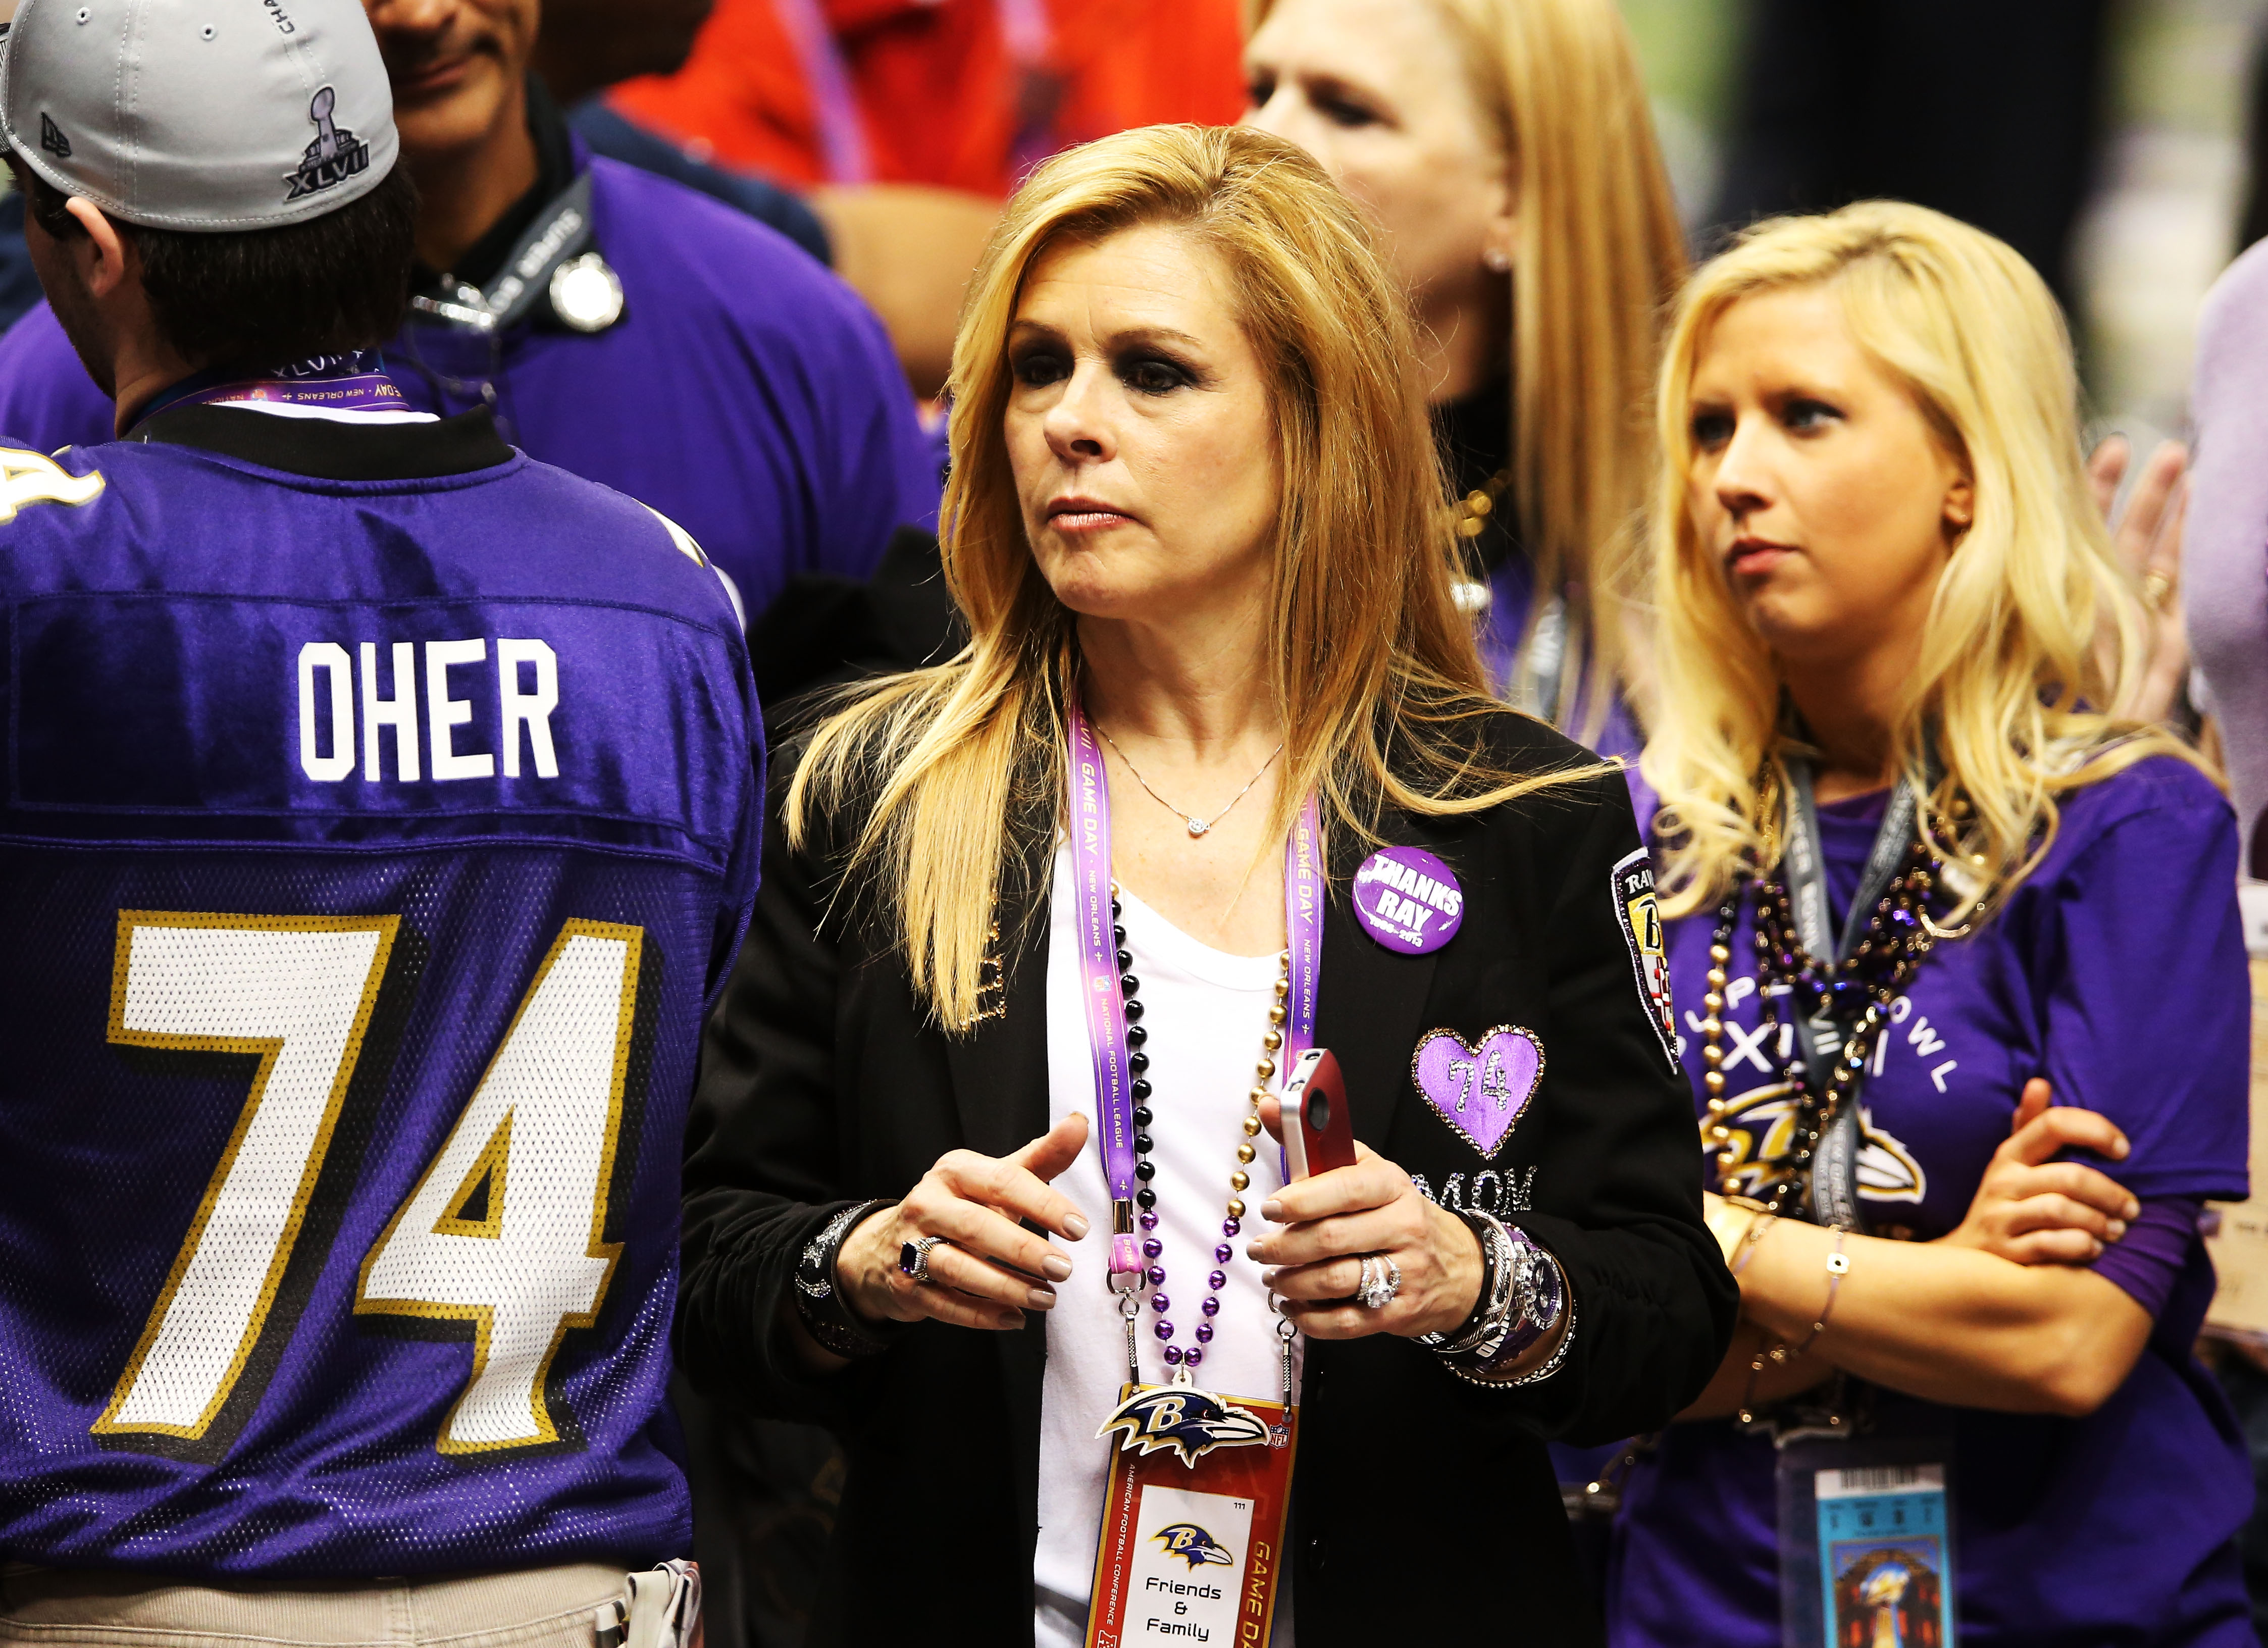 Leigh Anne Tuohy during Super Bowl XLVII at the Mercedes-Benz Superdome on February 3, 2013, in New Orleans, Louisiana. | Source: Getty Images